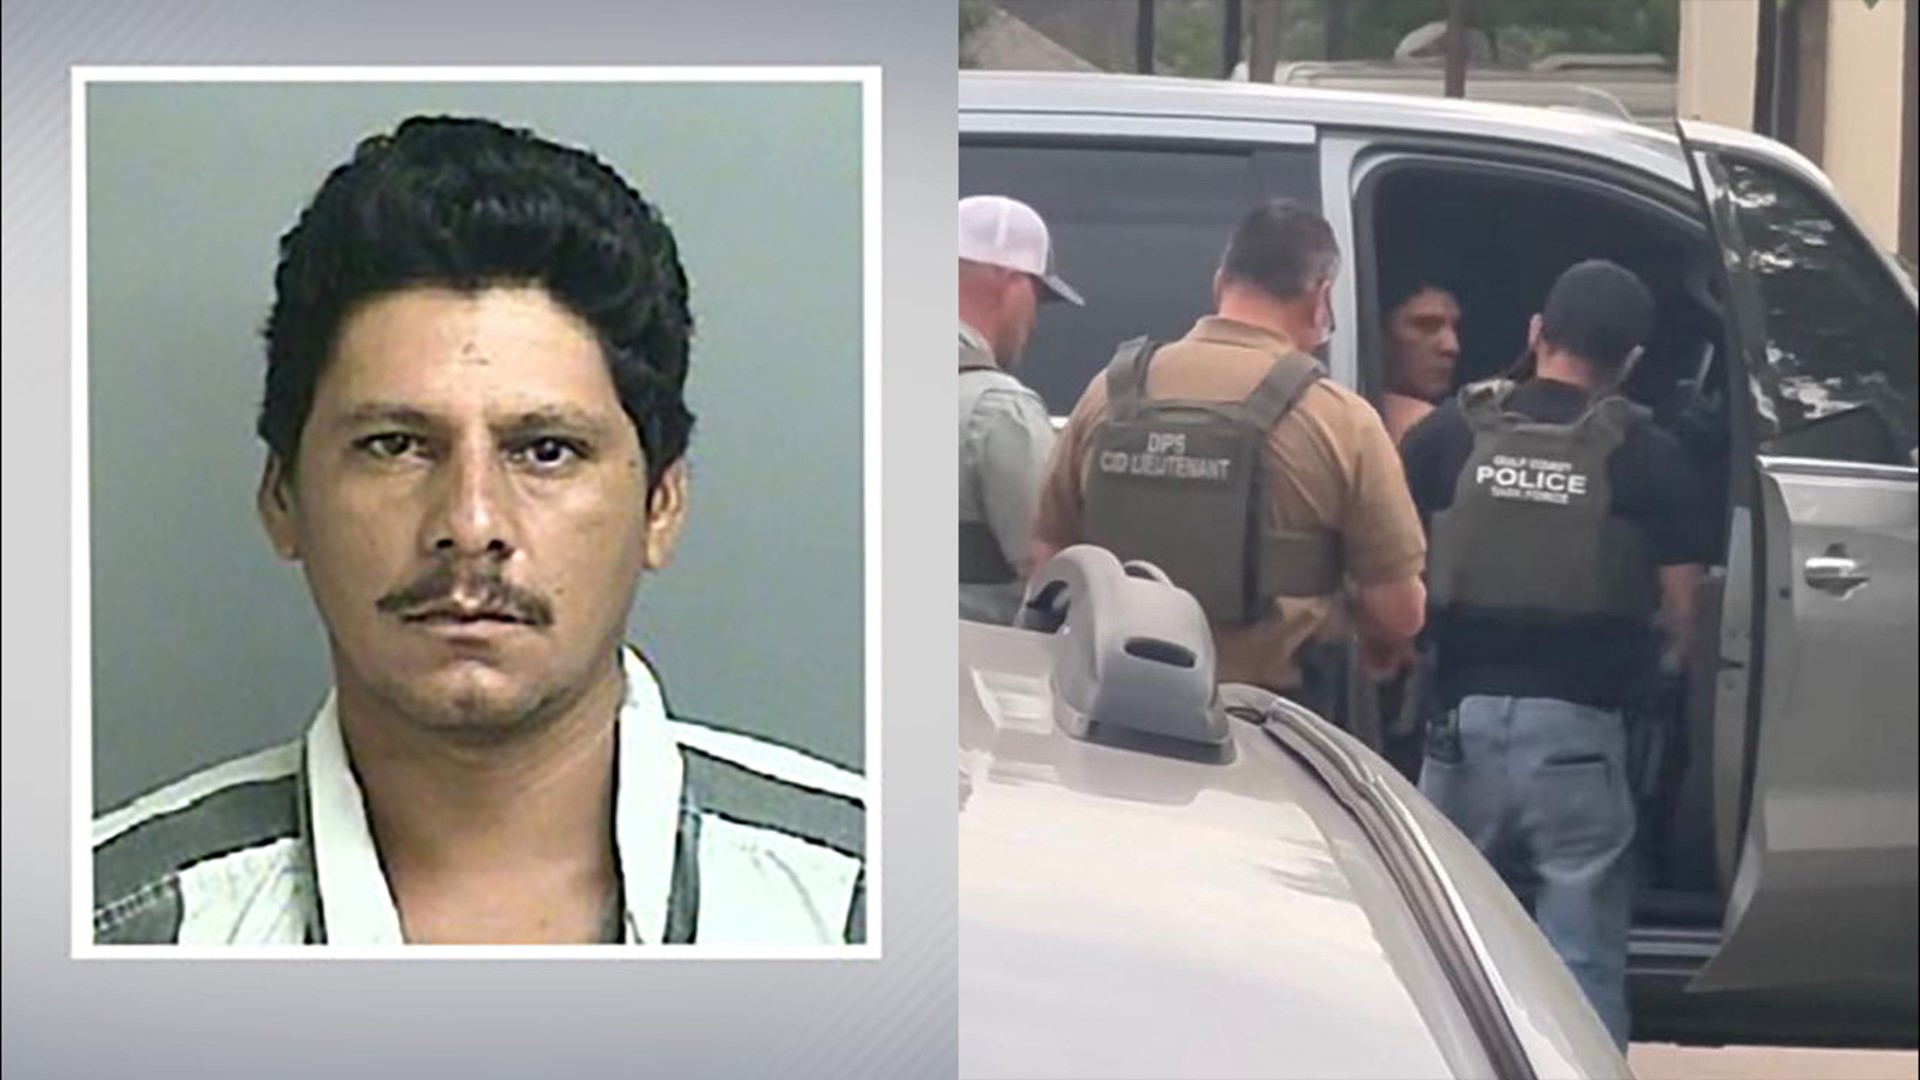 Authorities say Francisco Oropeza shot and killed five of his neighbors, including a 9-year-old. He was captured Tuesday after a wide search that lasted days.